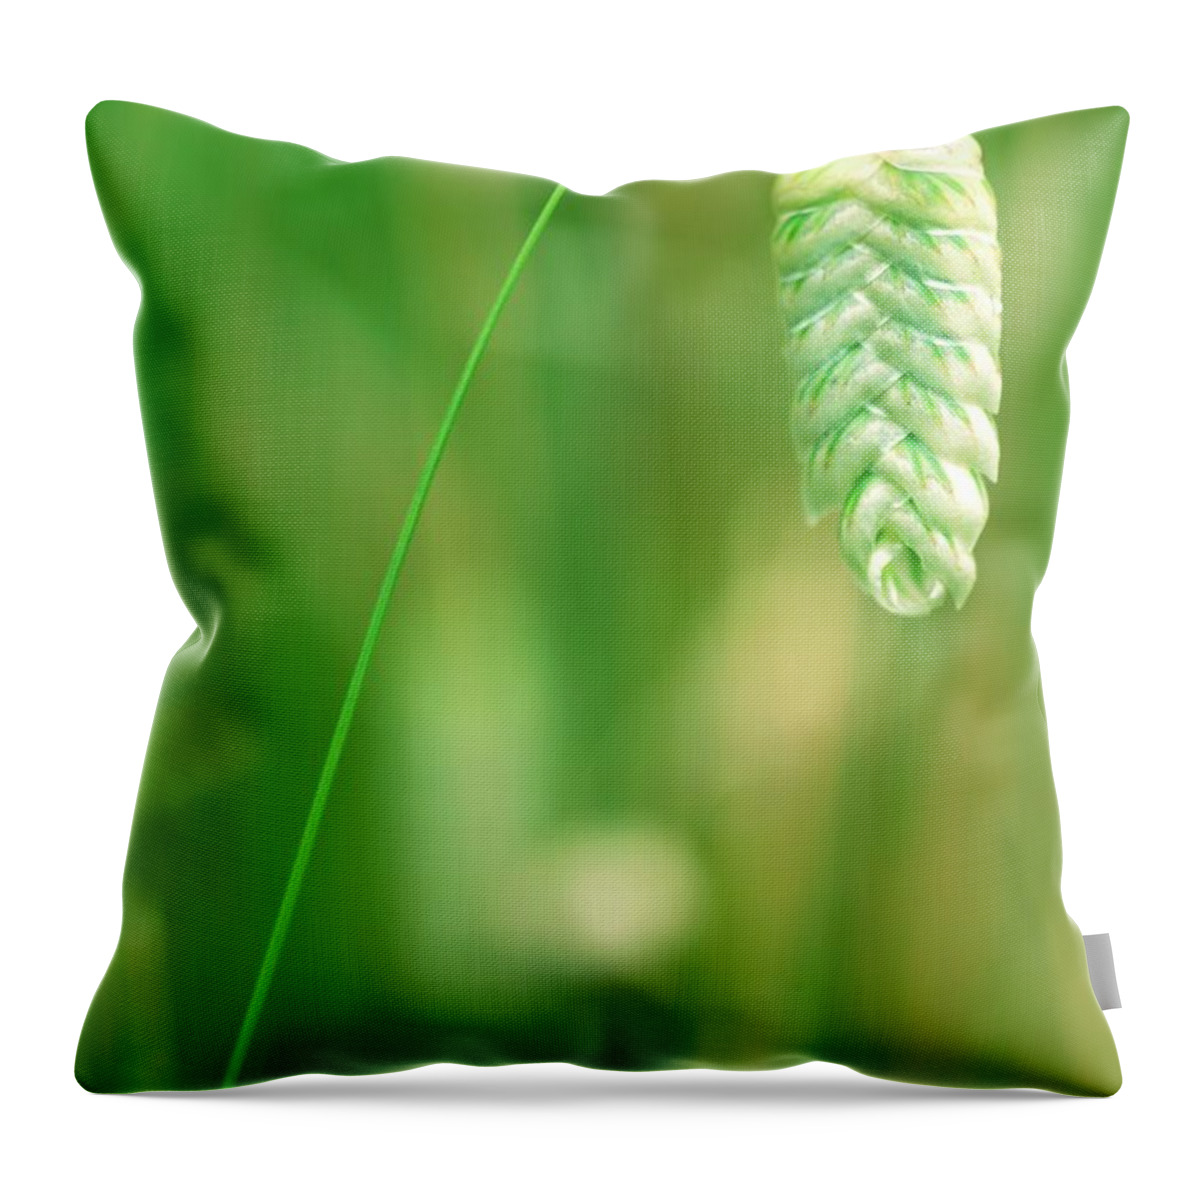 Hanging Throw Pillow featuring the photograph Close-up Of The Stem And Head Of A by Neil Overy